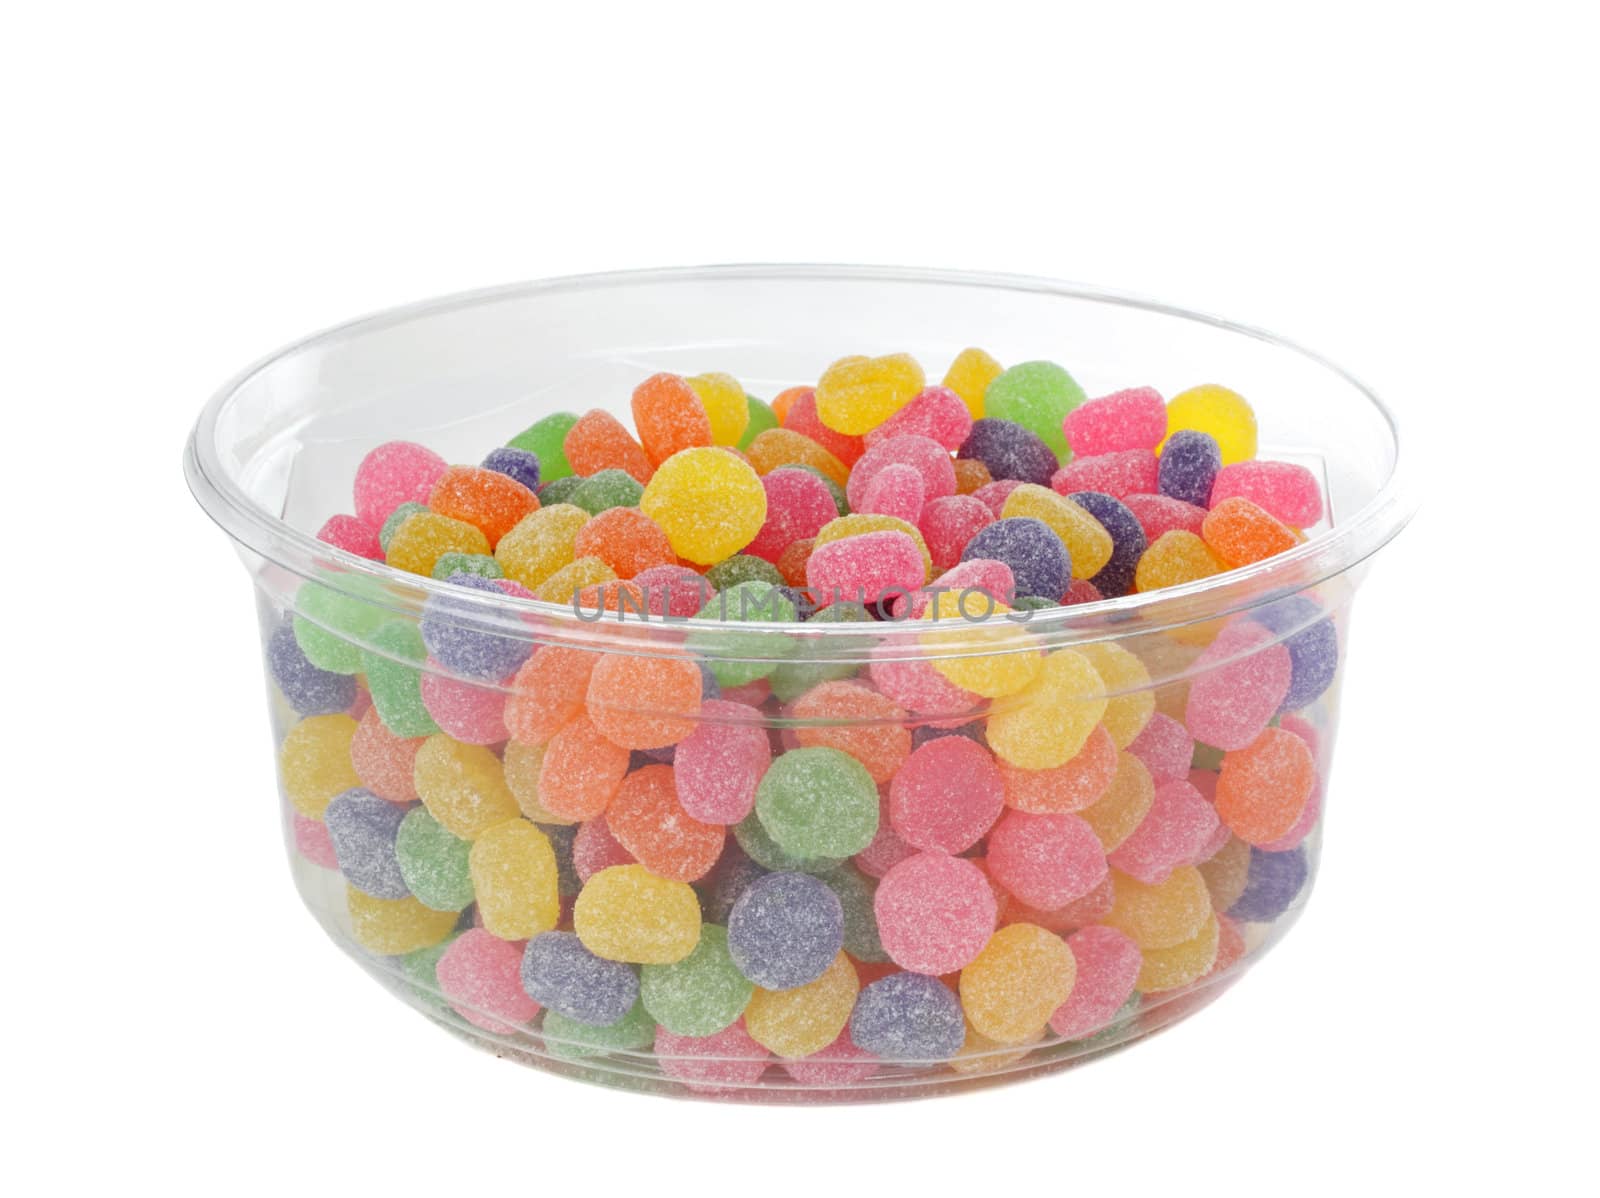 colorful jelly candies in a transparent plastic container